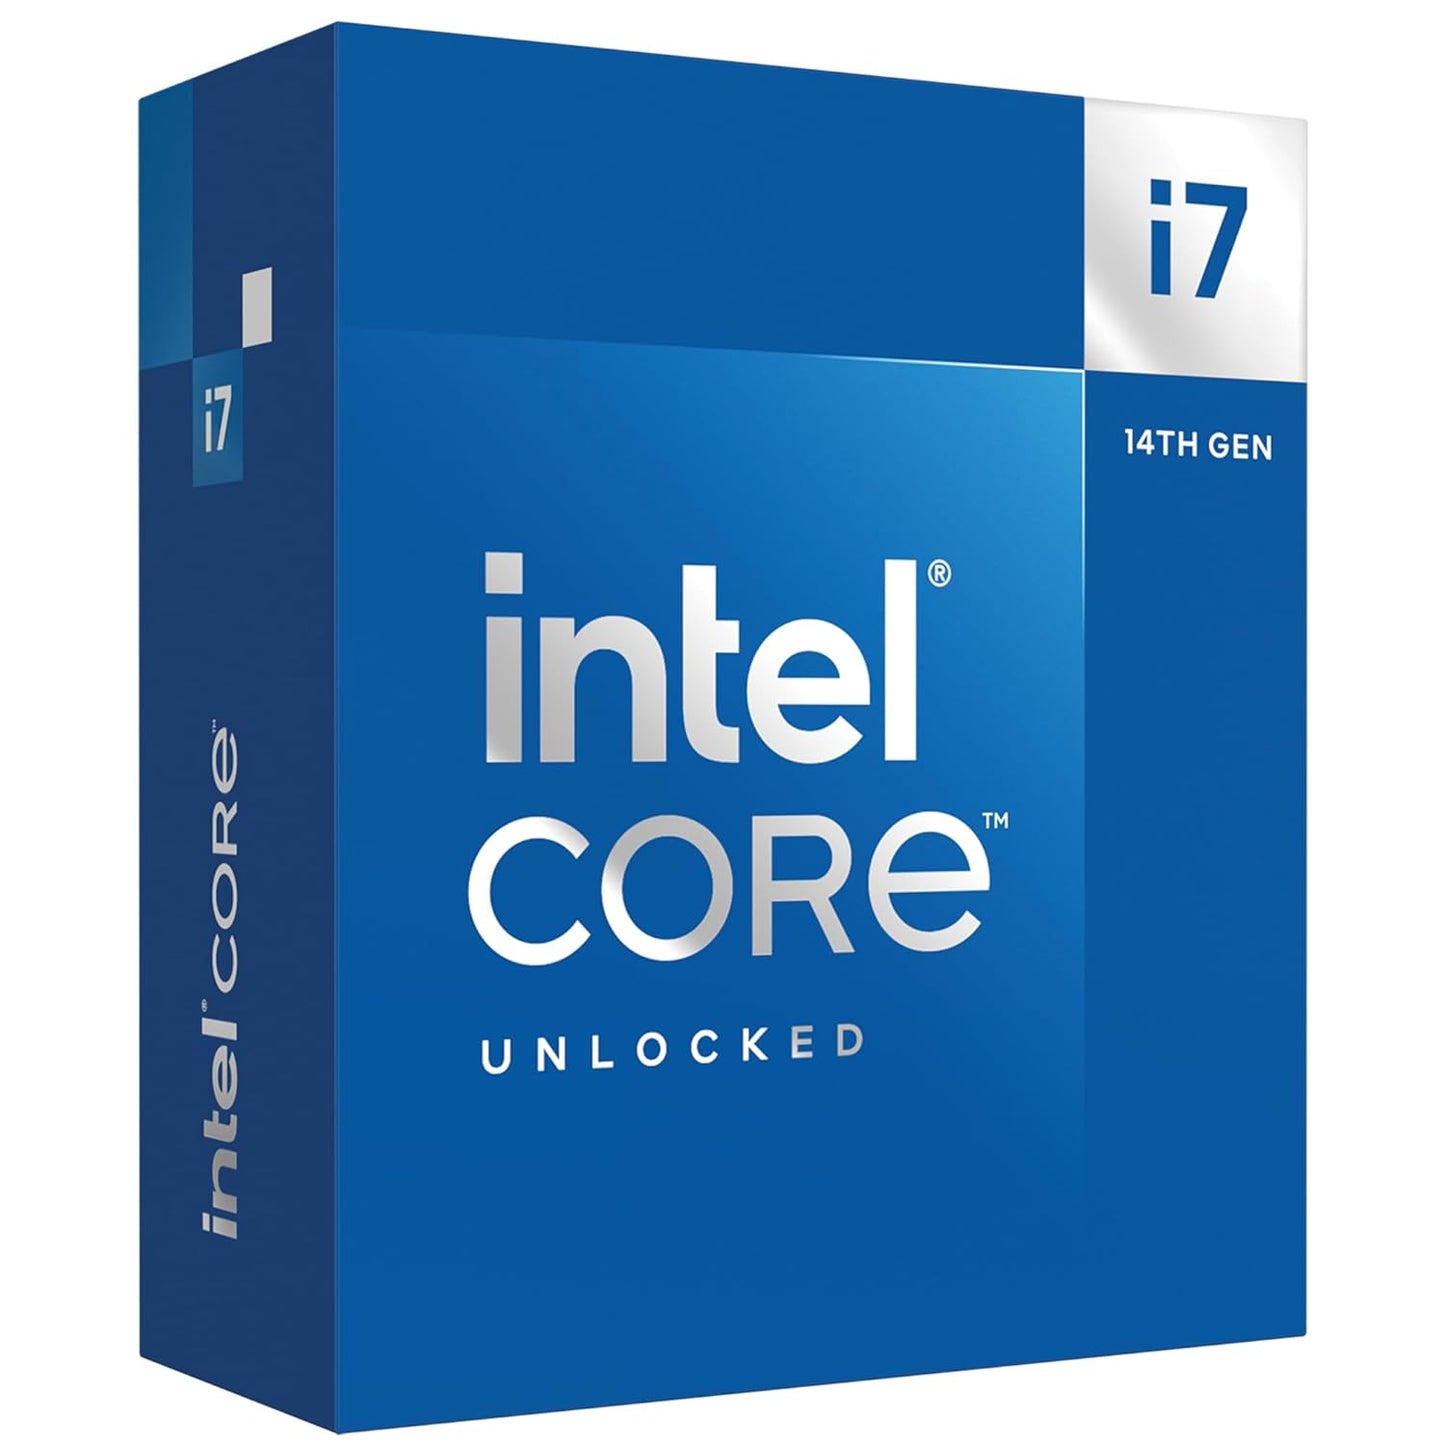 Intel Core i7-14700K 14th Gen Processor with 20 Cores and 28 Threads, 5.4GHz Max Turbo Frequency, DDR5/DDR4 Memory Support, Intel UHD Graphics 770, 5.0 PCI Express Version, Socket LGA-1700 - Desktop CPU